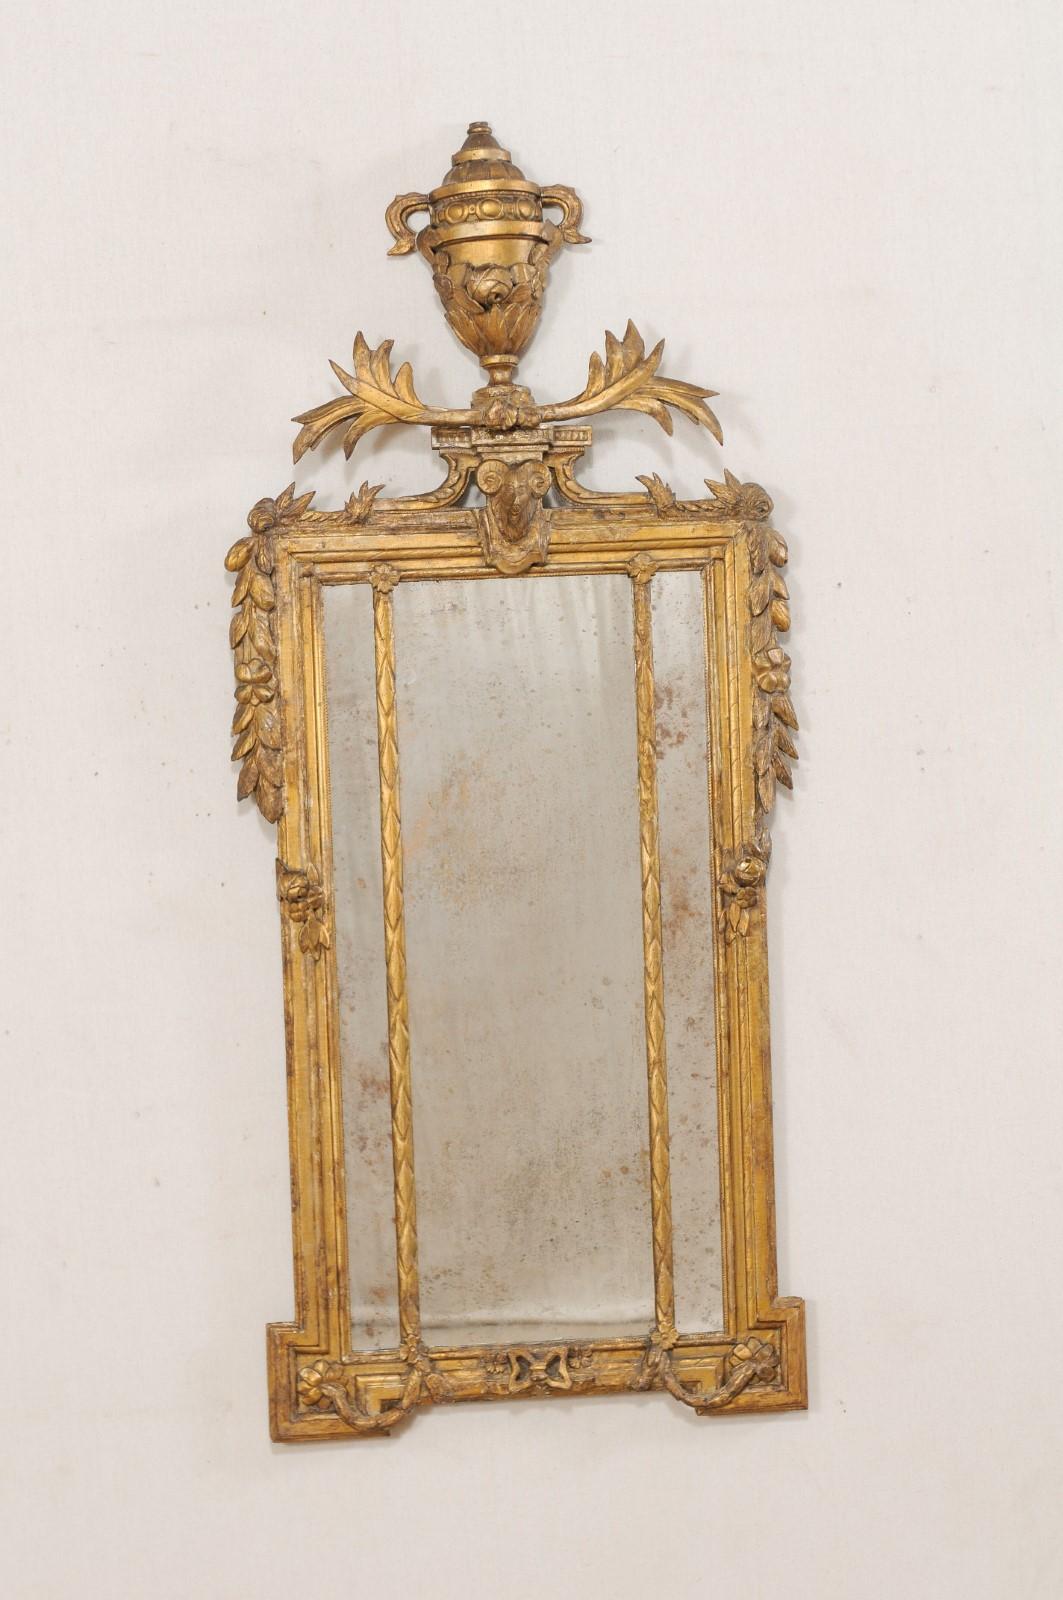 An Italian neoclassical gilt and carved wood mirror, circa early 1800s. This early 19th century neoclassical mirror from Italy features a richly carved giltwood surround topped with a raised urn crest, spewing leaves, and ram's head carved beneath,